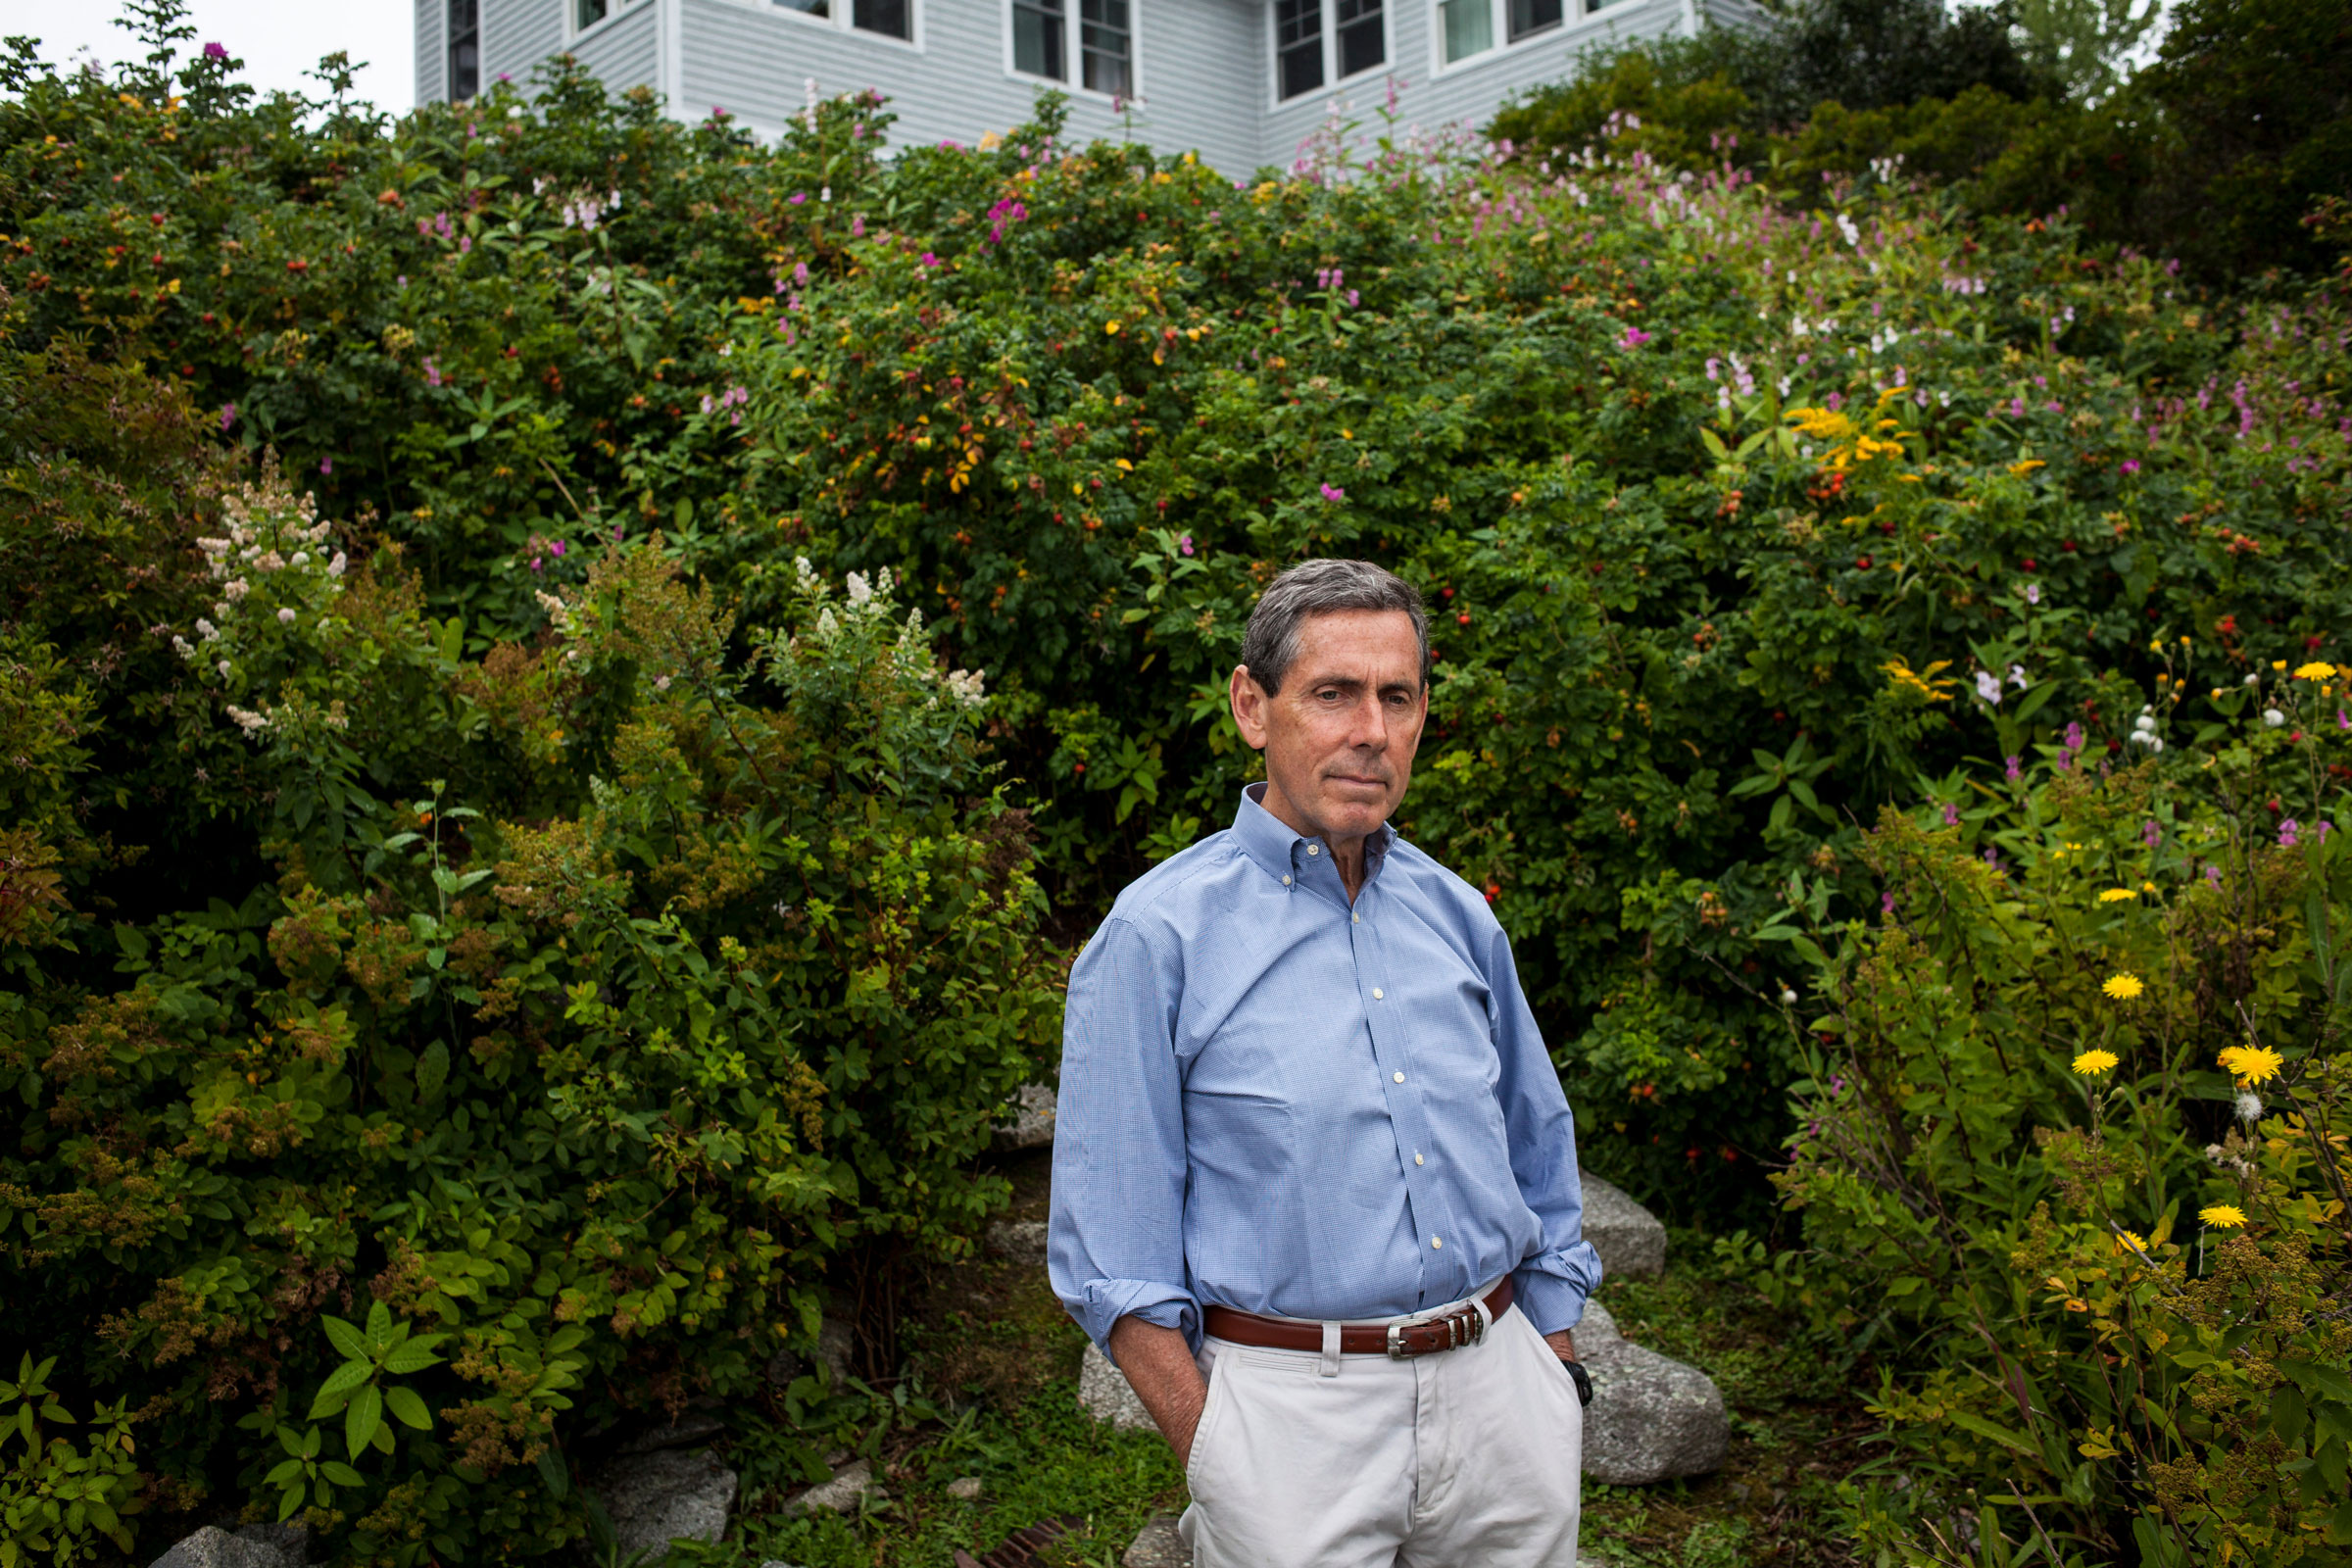 Edward Blum, who has waged a years-long legal campaign against affirmative action policies, at his home in South Thomaston, Maine, on Aug. 15, 2017. (Sarah Rice—The New York Times/Redux)